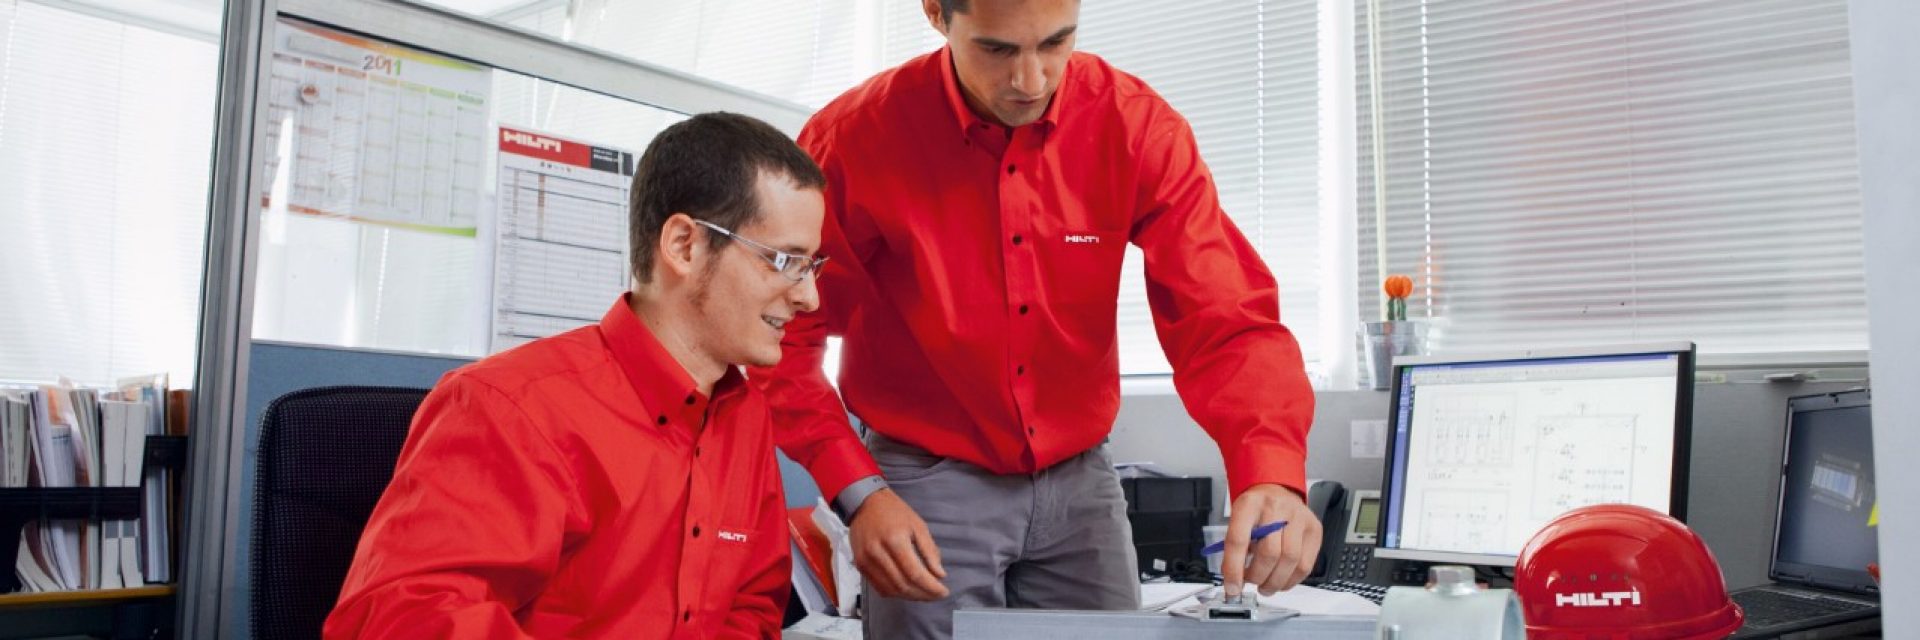 Hilti engineering support technical services